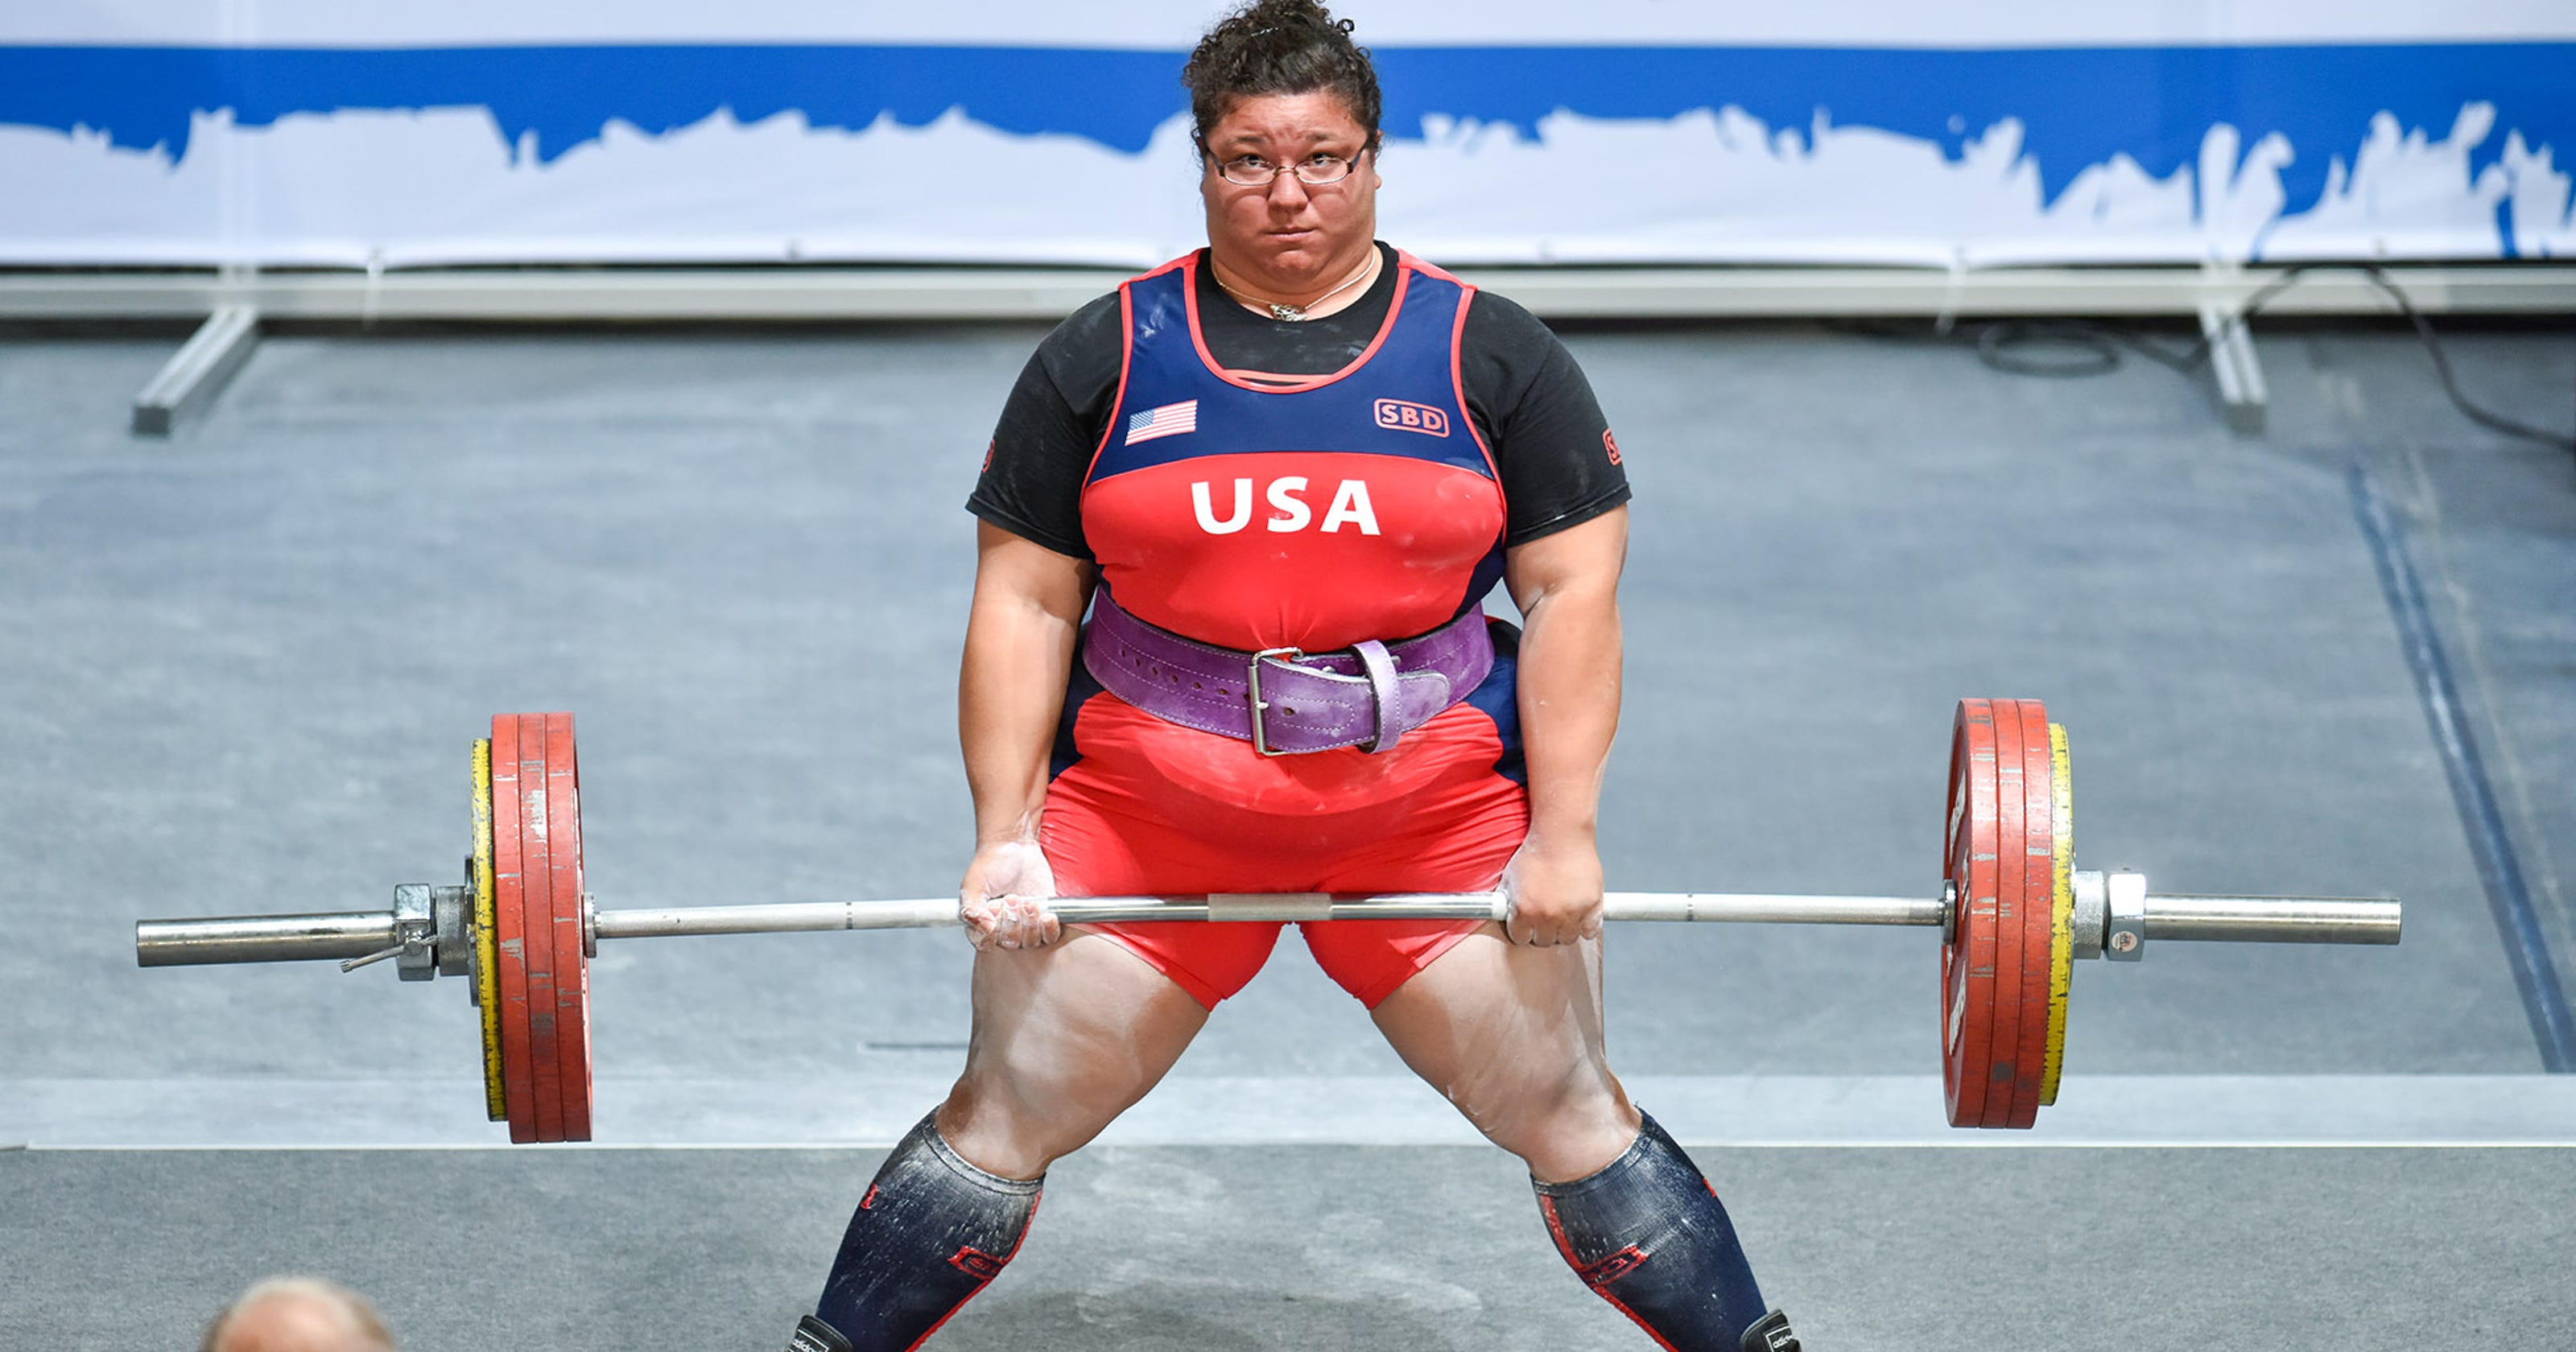 Is Battle Creek's Bonica Lough the strongest woman in the world?